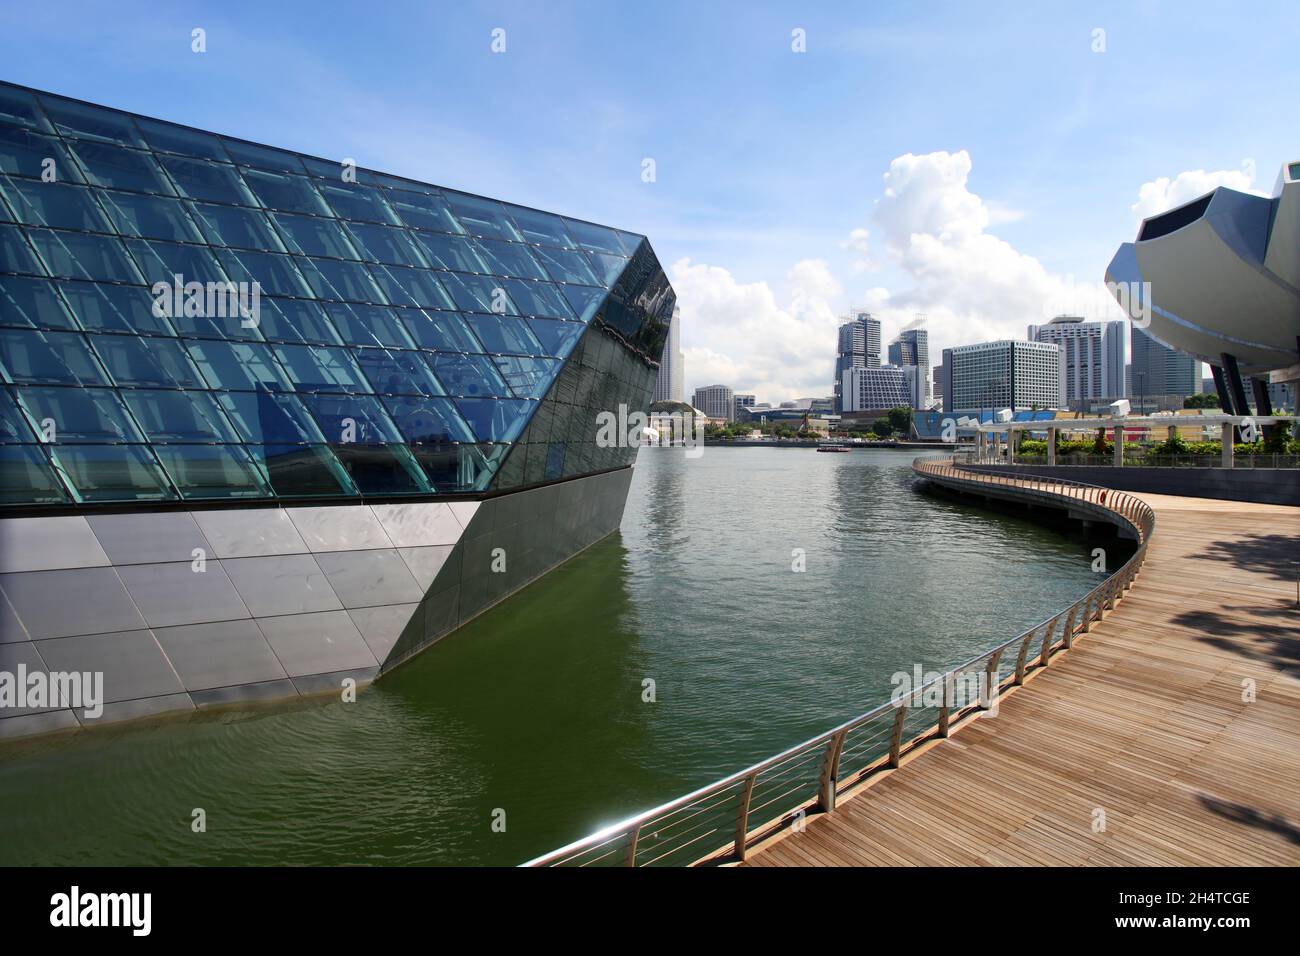 The Louis Vuitton store with modern glass and steel construction at Marina  Bay Sands set in the water of the bay in Singapore Stock Photo - Alamy